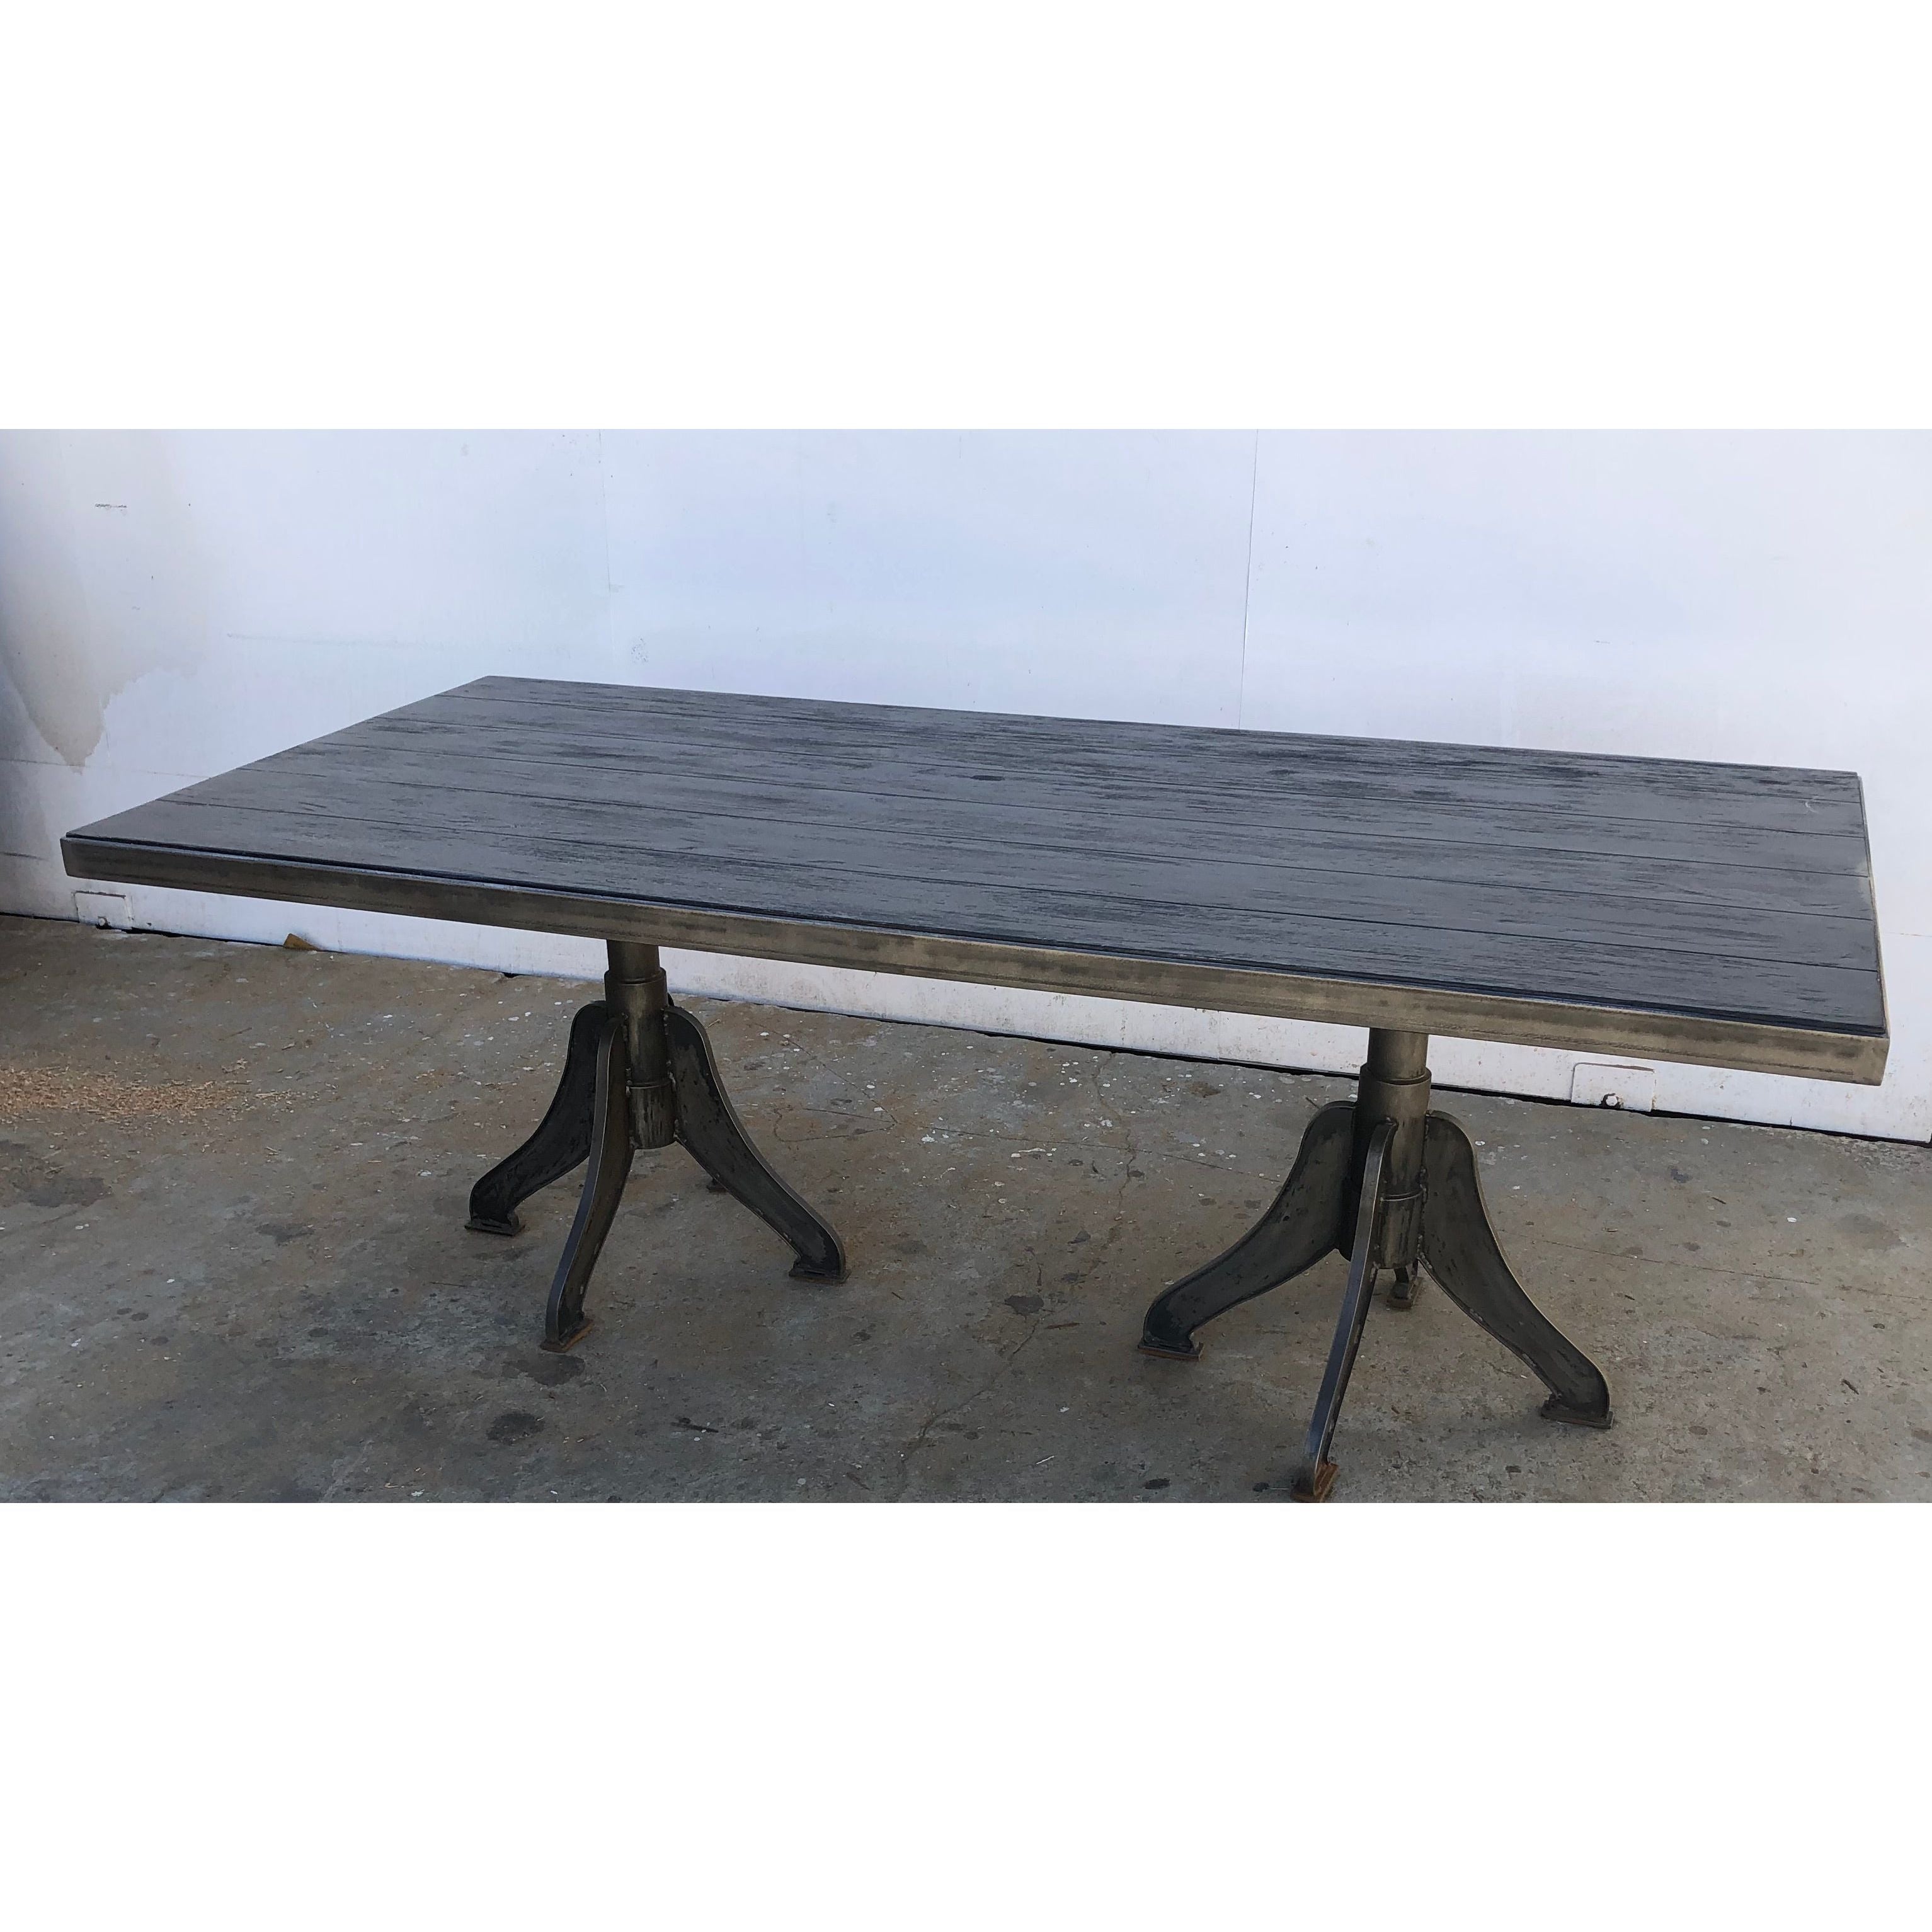 Steel Dining Room Table : Dining Room Furniture Set Metal Dining Room Table And Chairs For Sale Buy Dining Room Table And Chairs For Sale Dining Room Furniture Set Metal Dining Room Set Product On Alibaba Com : With a nod to vintage and industrial designs, the.